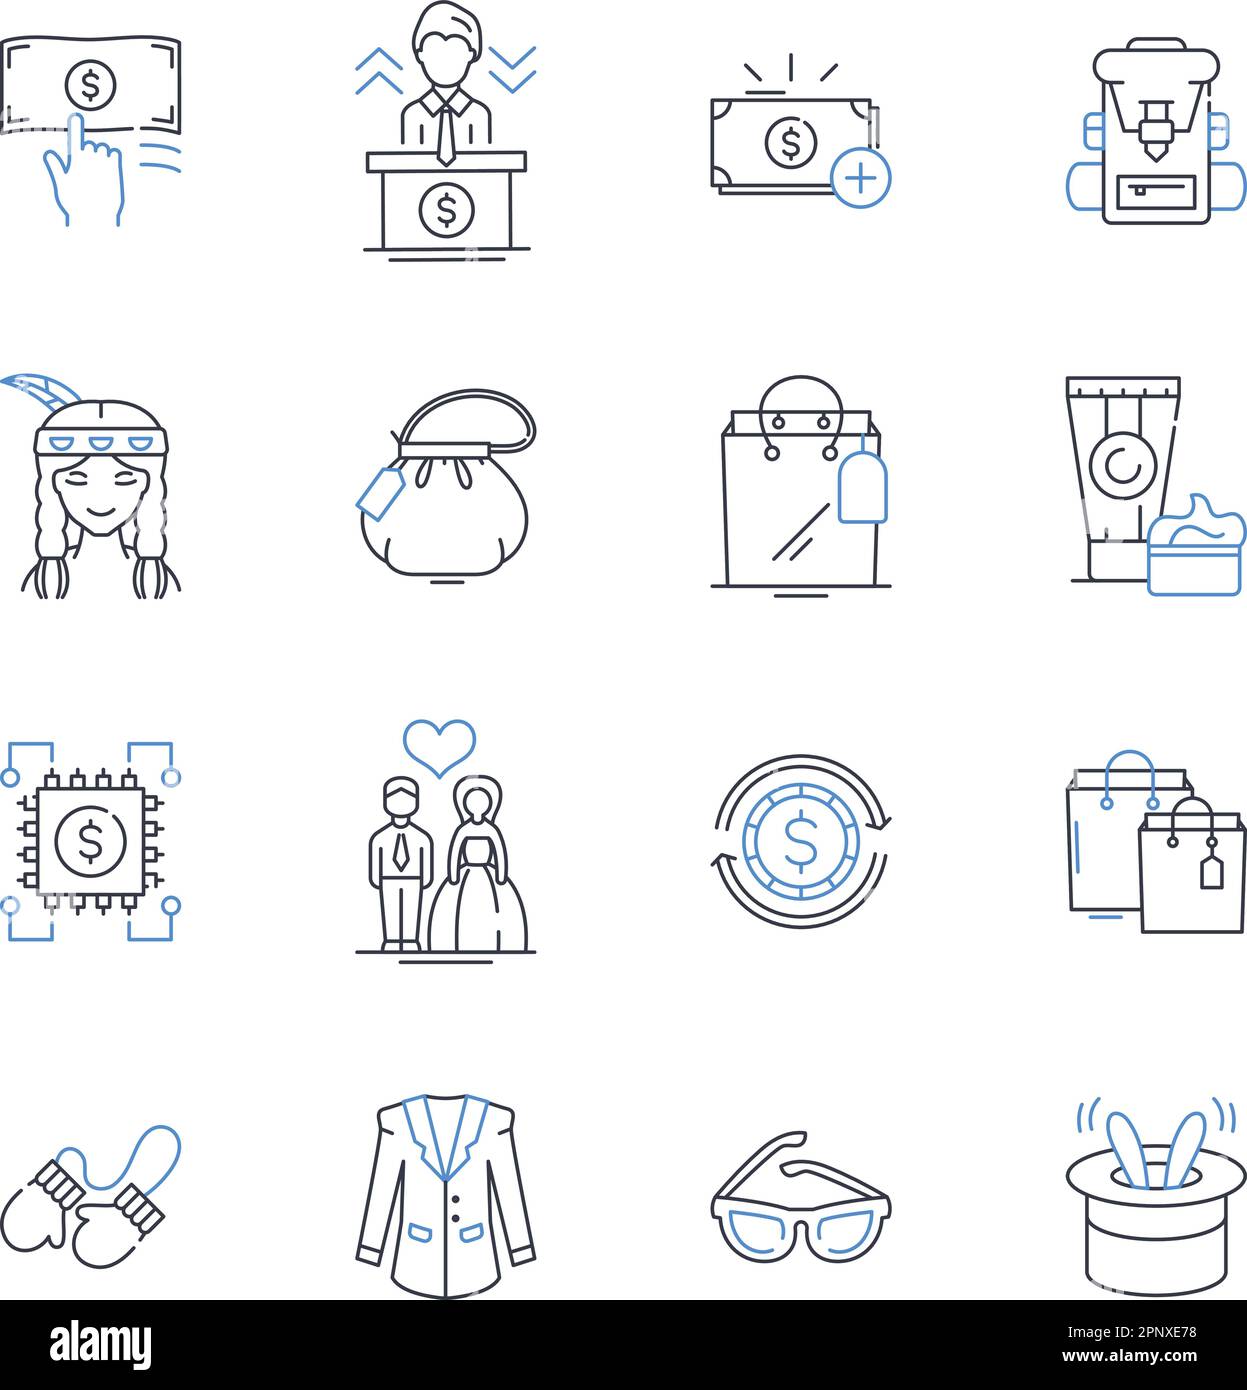 Health sector line icons collection. Wellness, Exercise, Nutrition ...